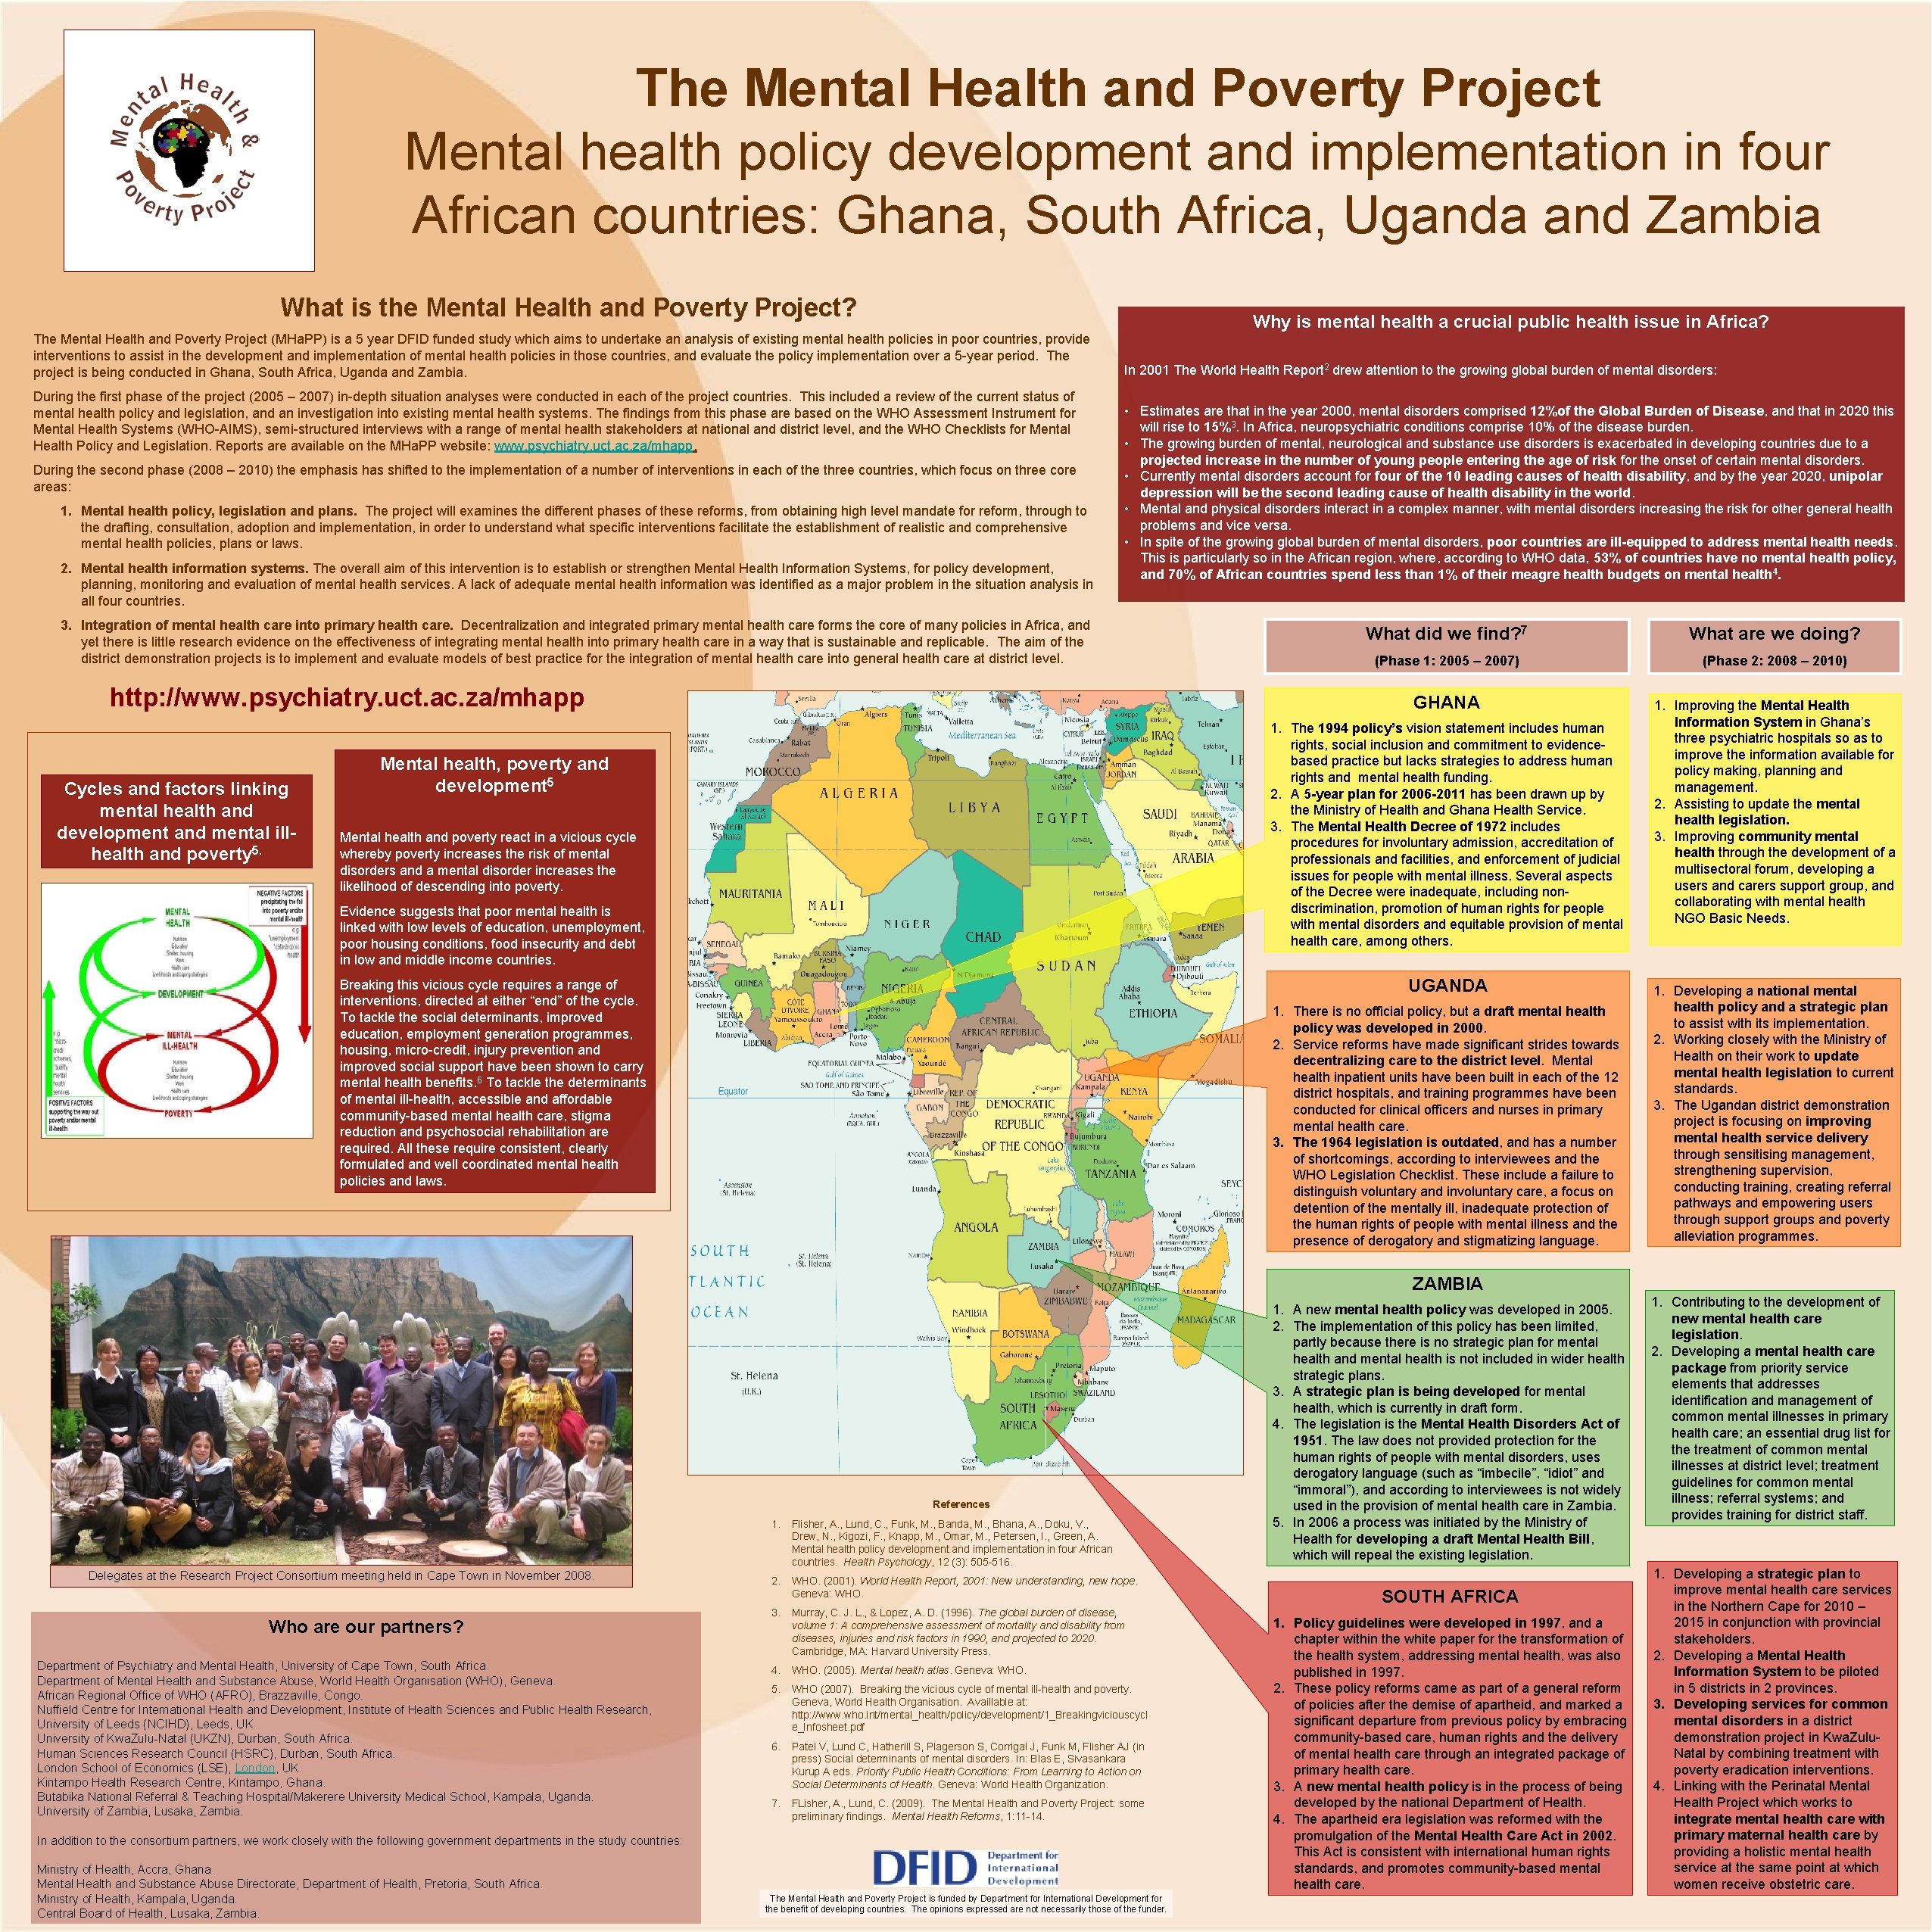 The Mental Health and Poverty Project Mental health policy development and implementation in four